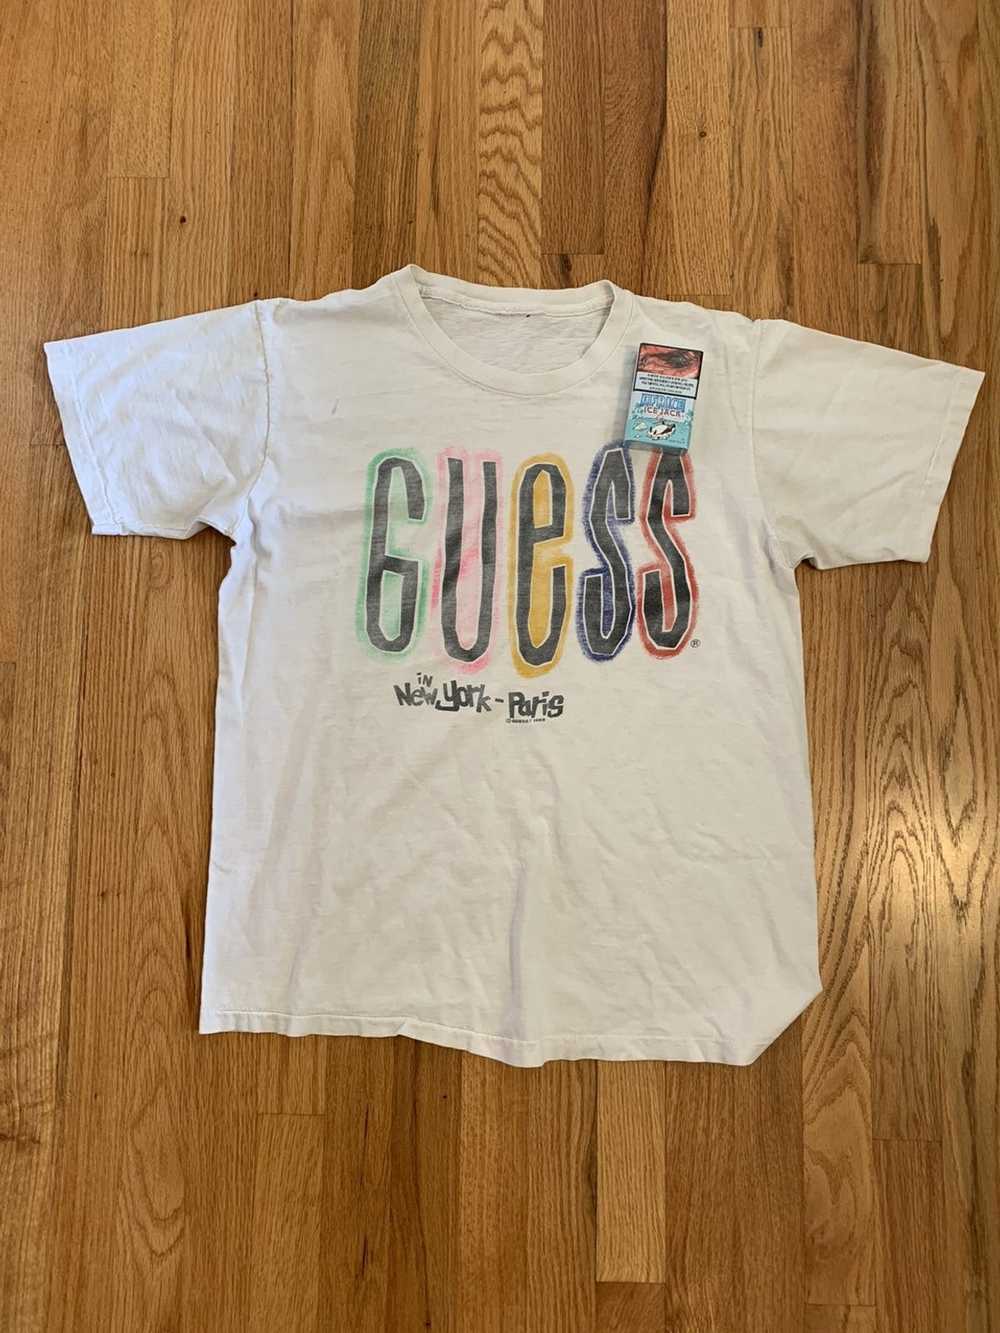 Guess × Vintage Guess in New York Tee, 1989 - image 1